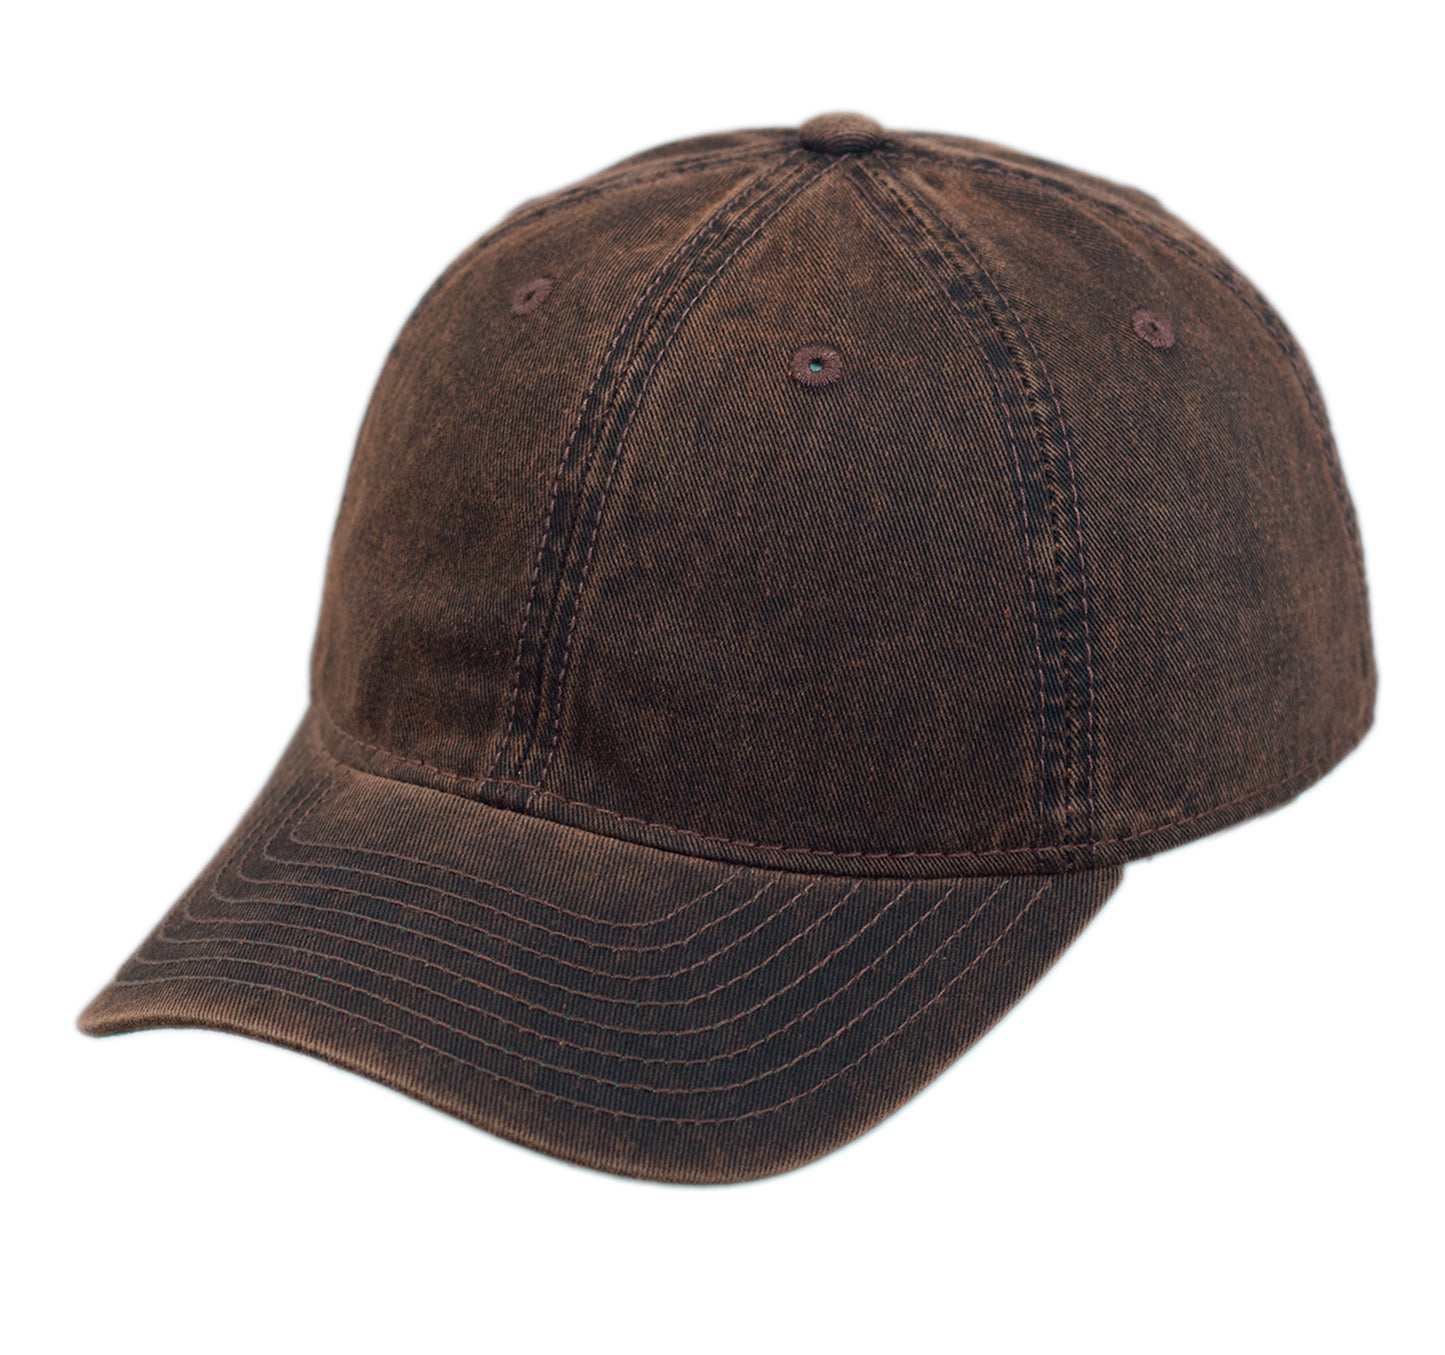 LDWC-individually washed fabric, Unstructured cap